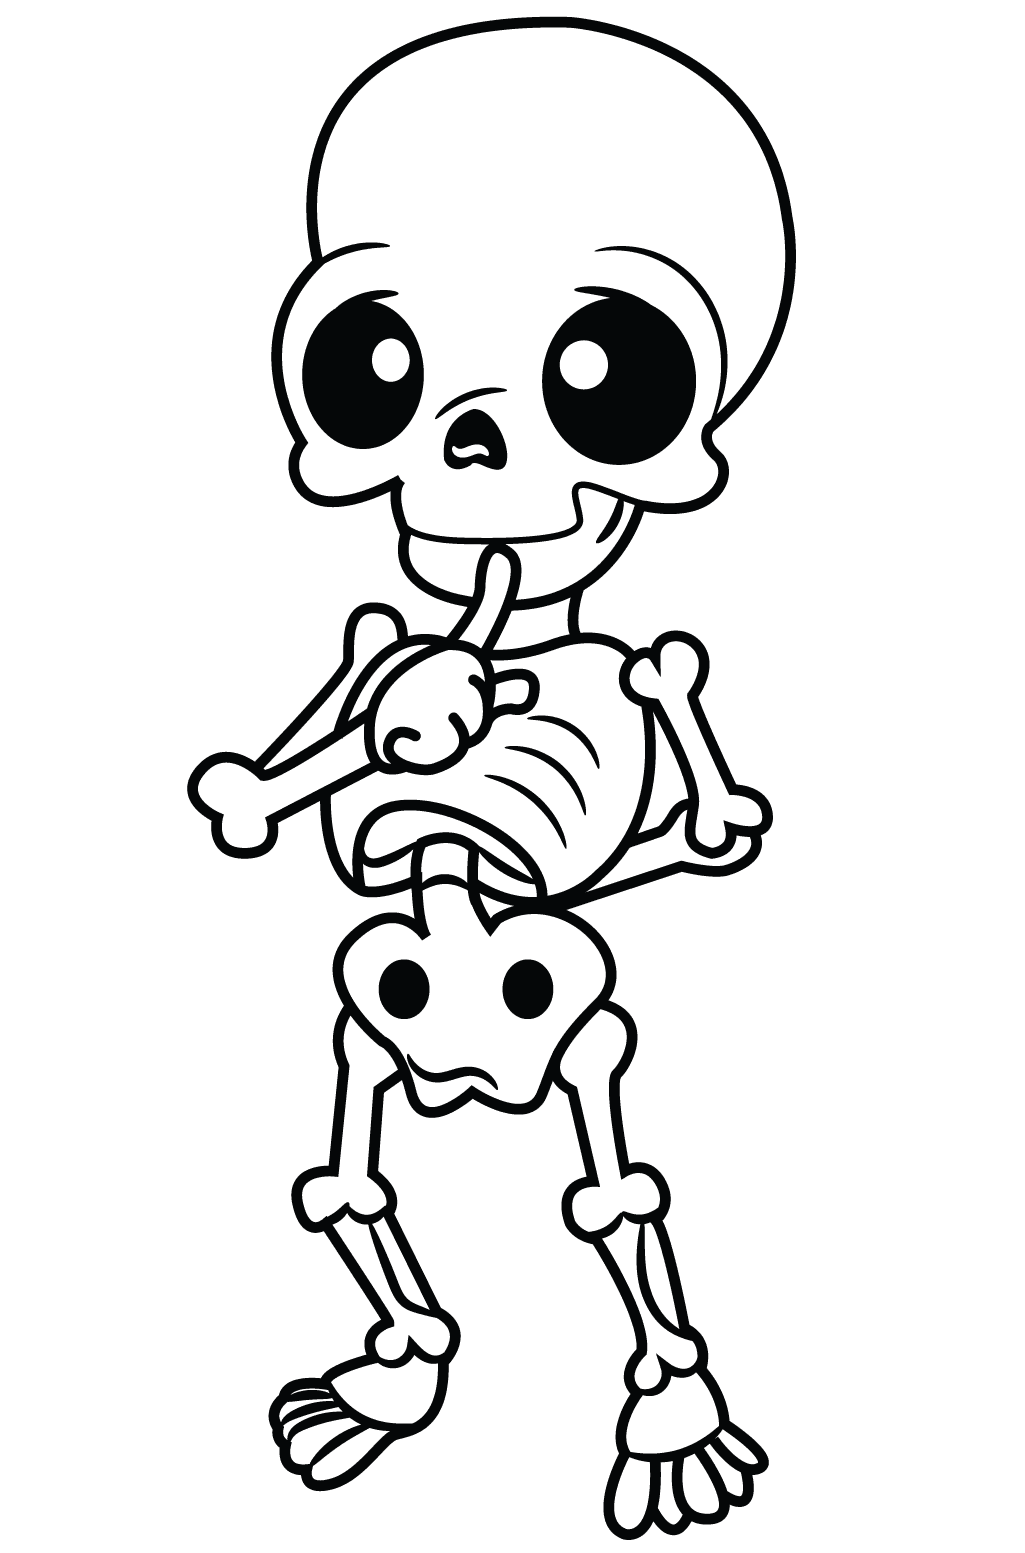 Cute Skeleton to Print Coloring Page